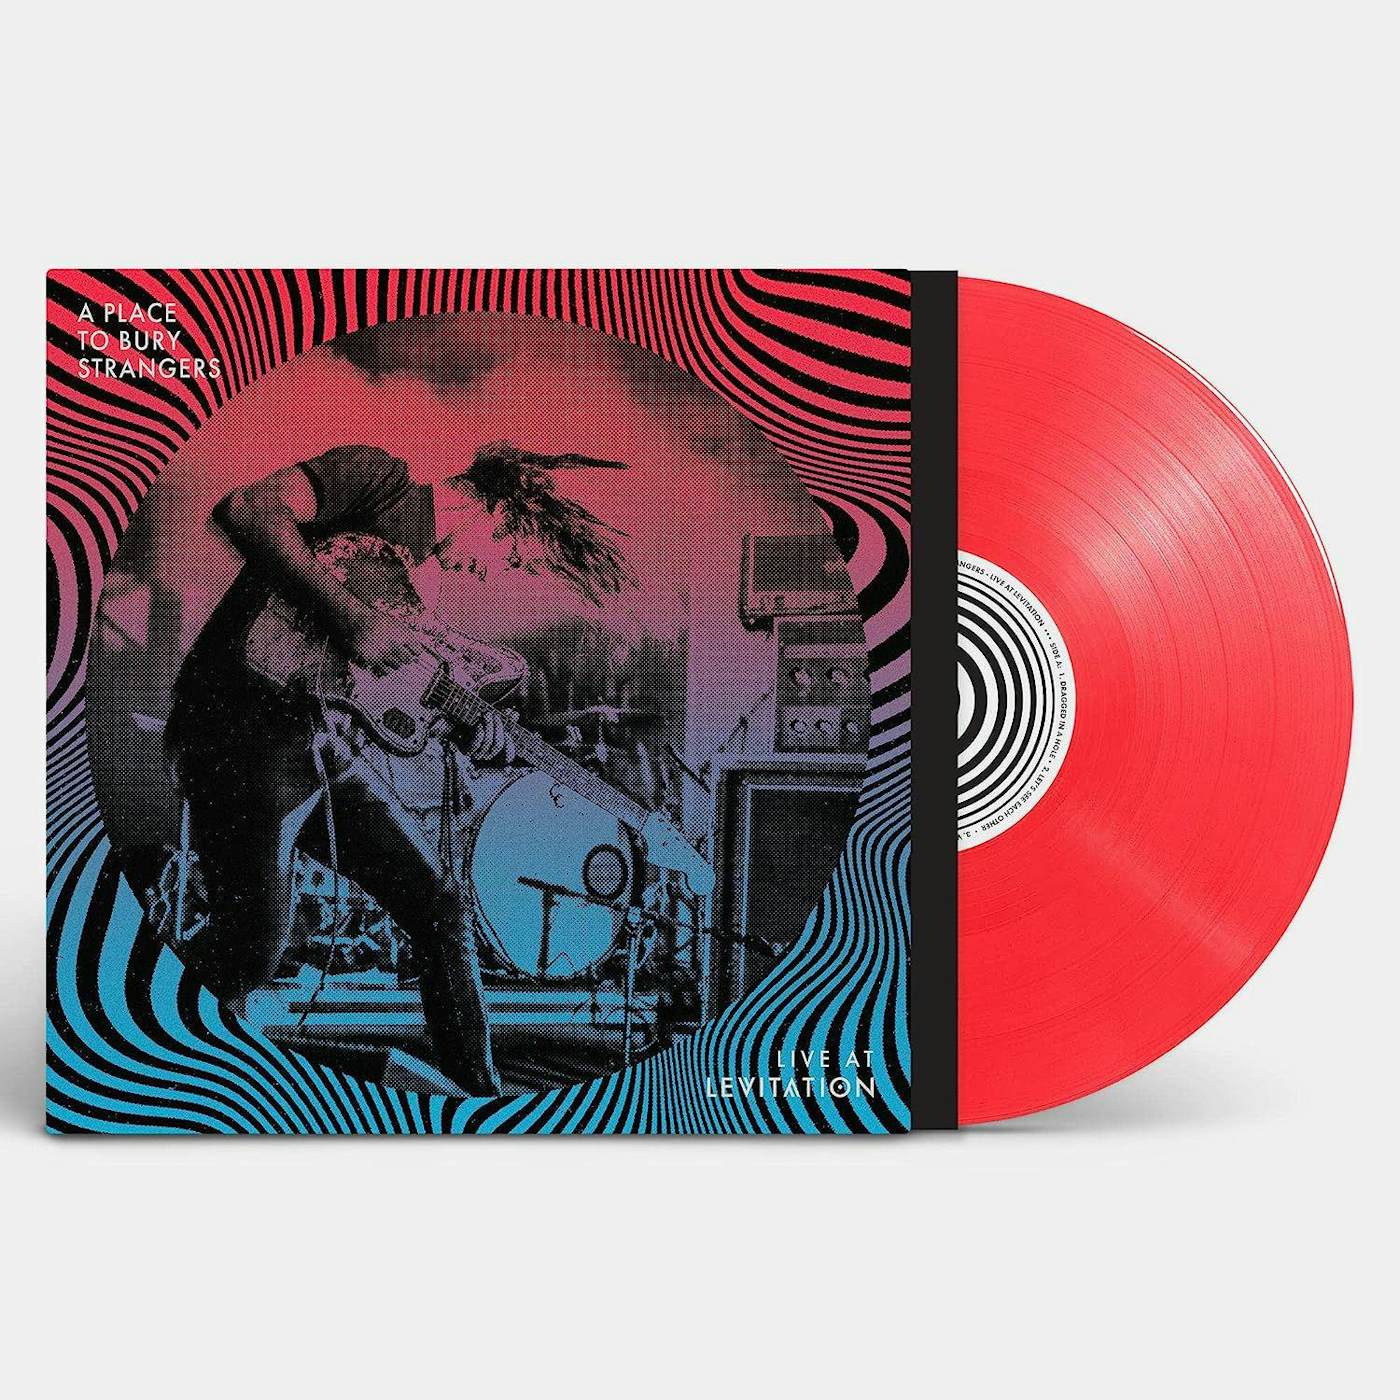 A Place To Bury Strangers Live At Levitation (Neon Coral) Vinyl Record